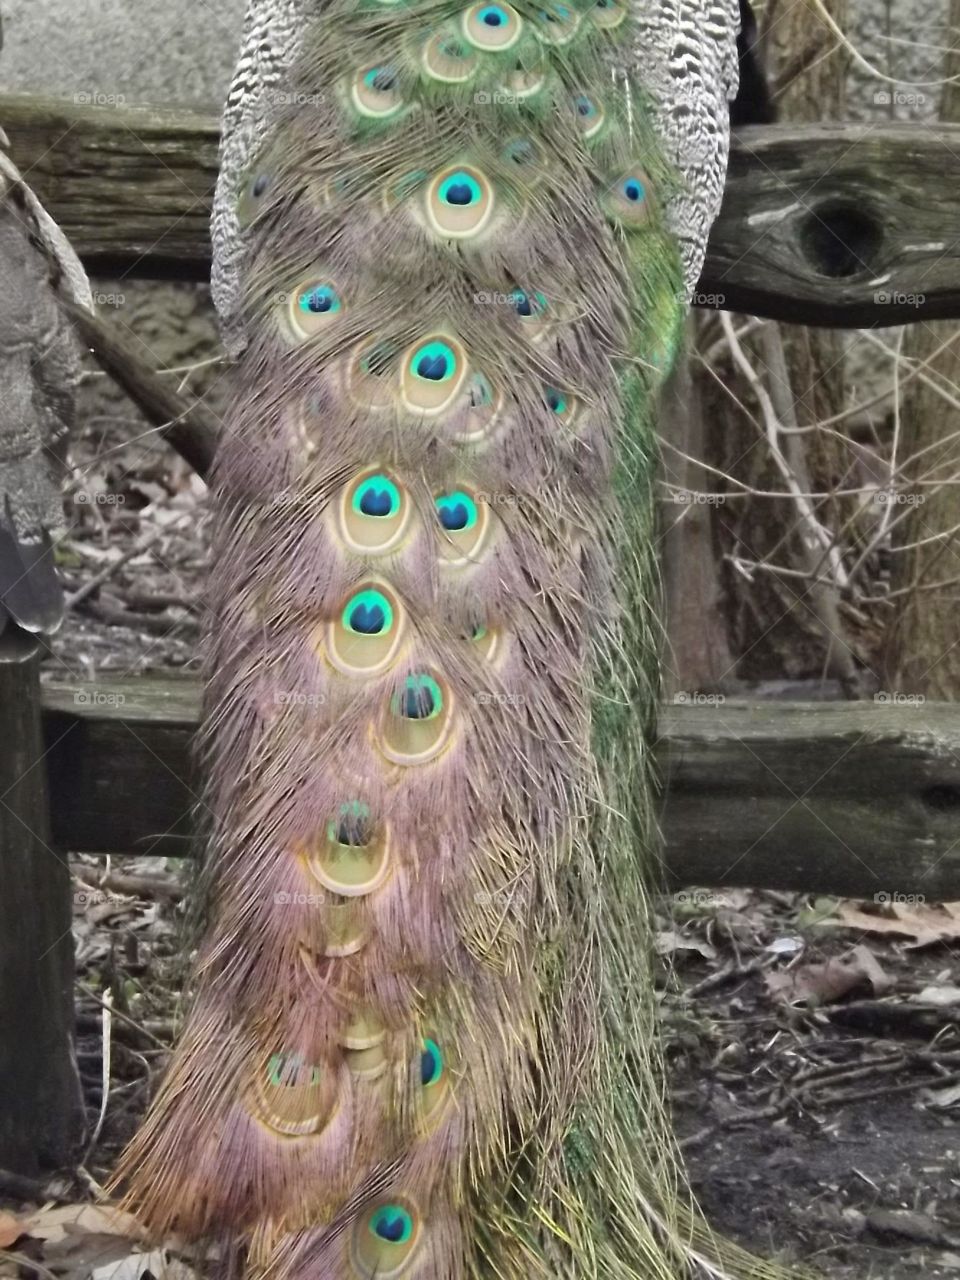 peacock tail. feathers of a peacock at the detroit zoo